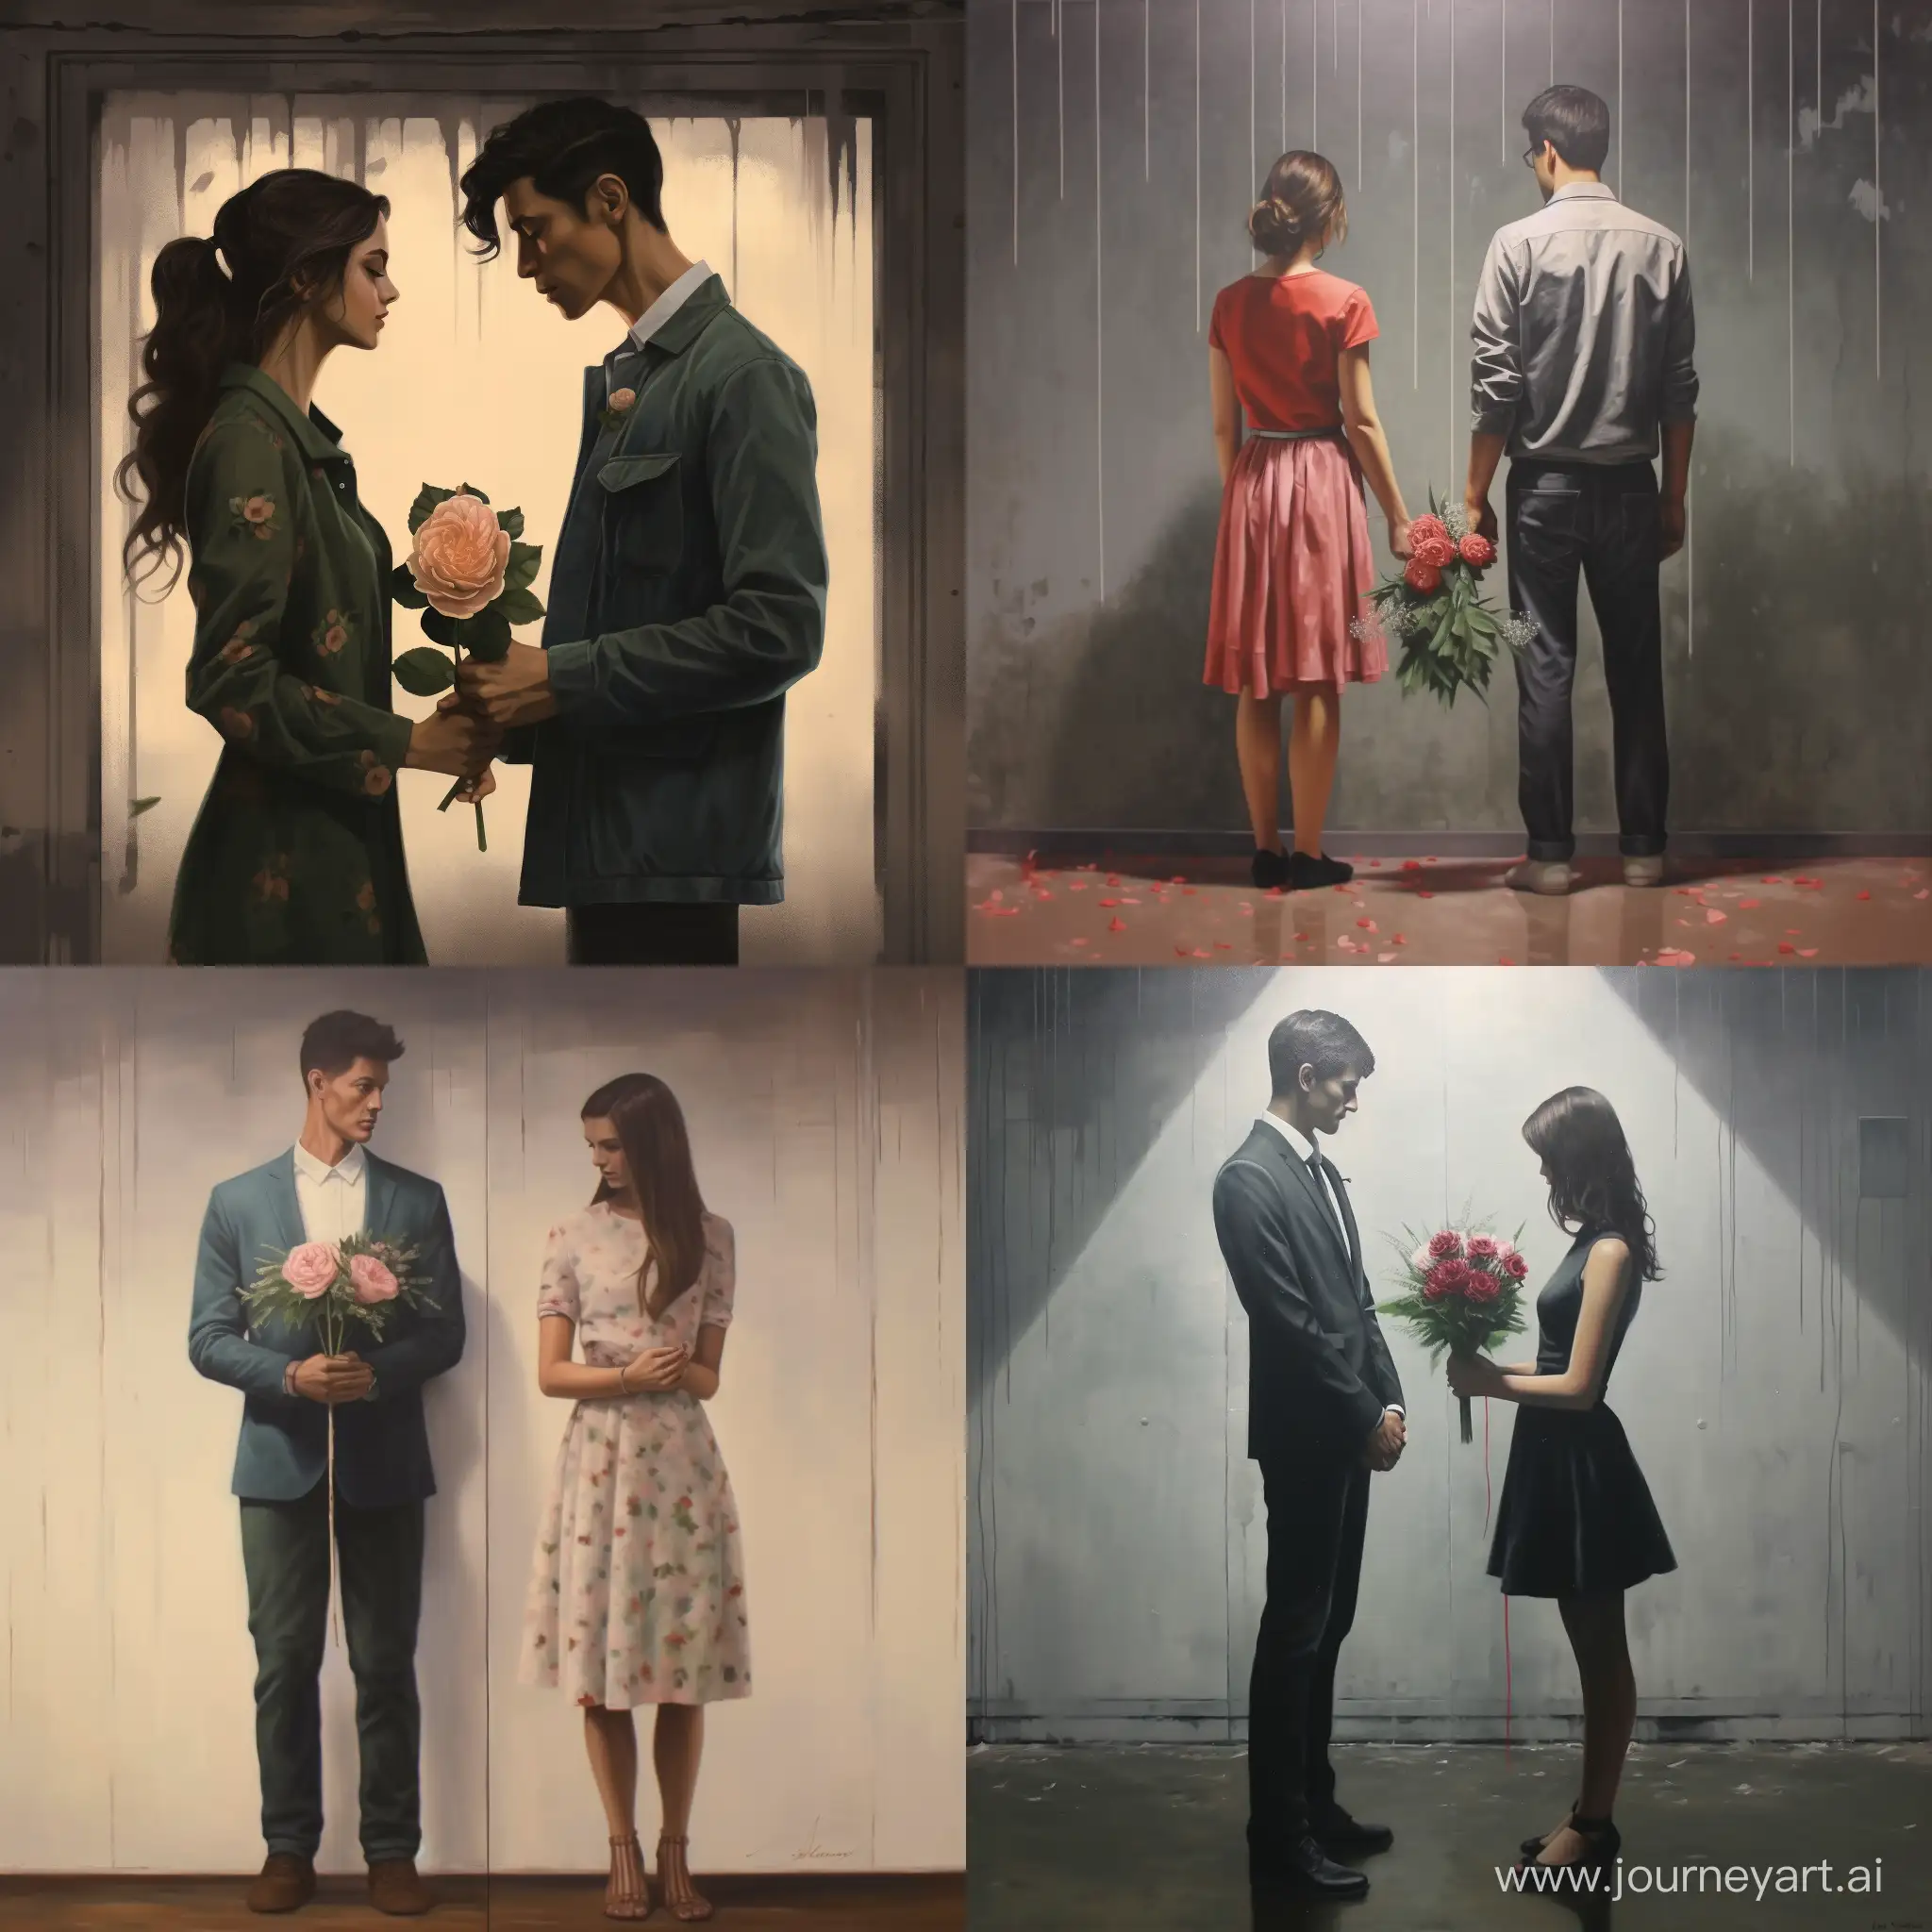 A man and woman stand in the same shade while it rains. Hold hands and face each other. The man on the right hides a bouquet of flowers behind his back. The woman on the left hides a gift box behind her.